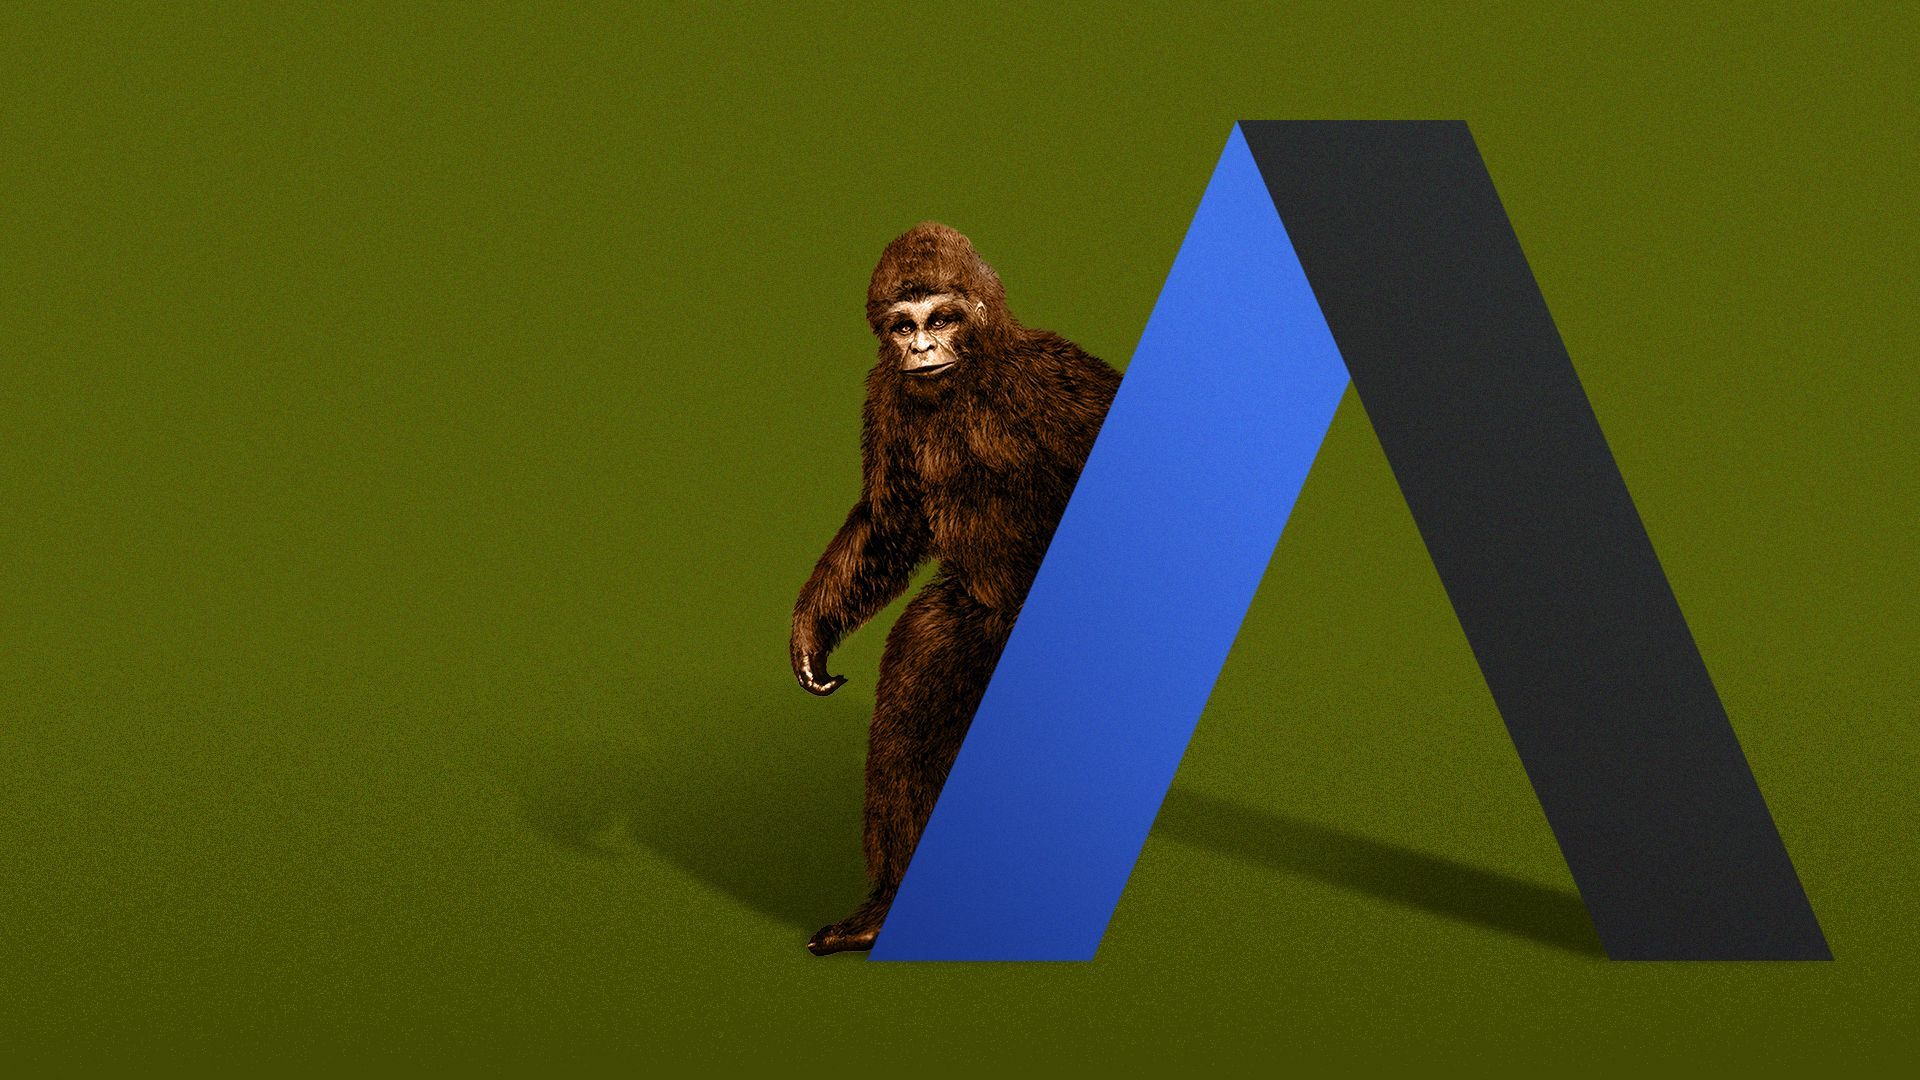 Illustration of Bigfoot peeking out from behind the Axios A logol